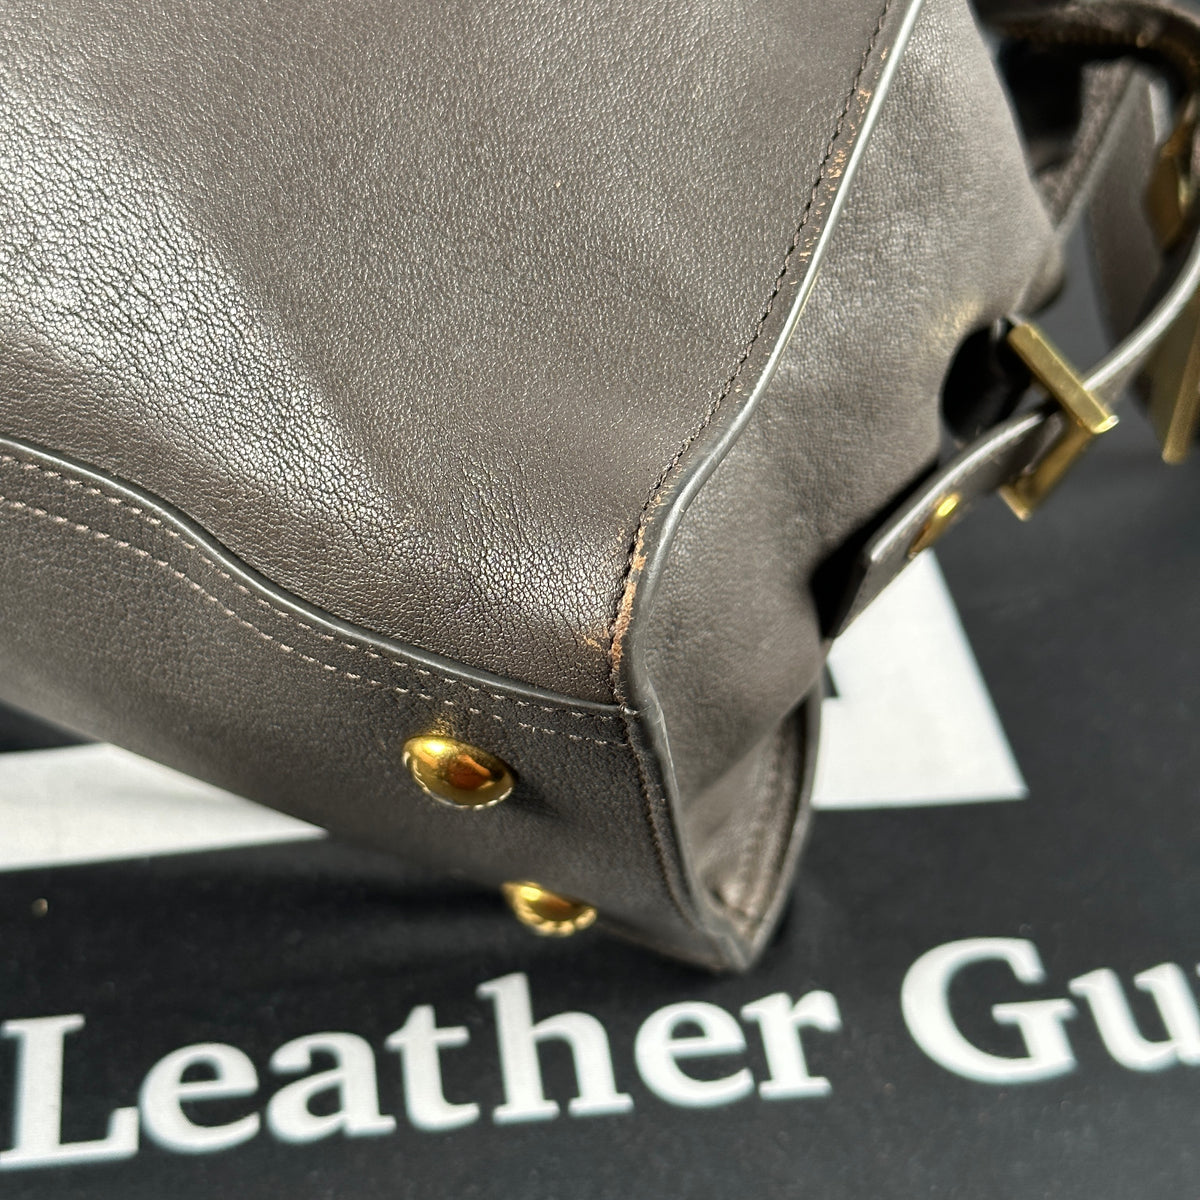 We repaired the piping around the edges of the Louis Vuitton bag